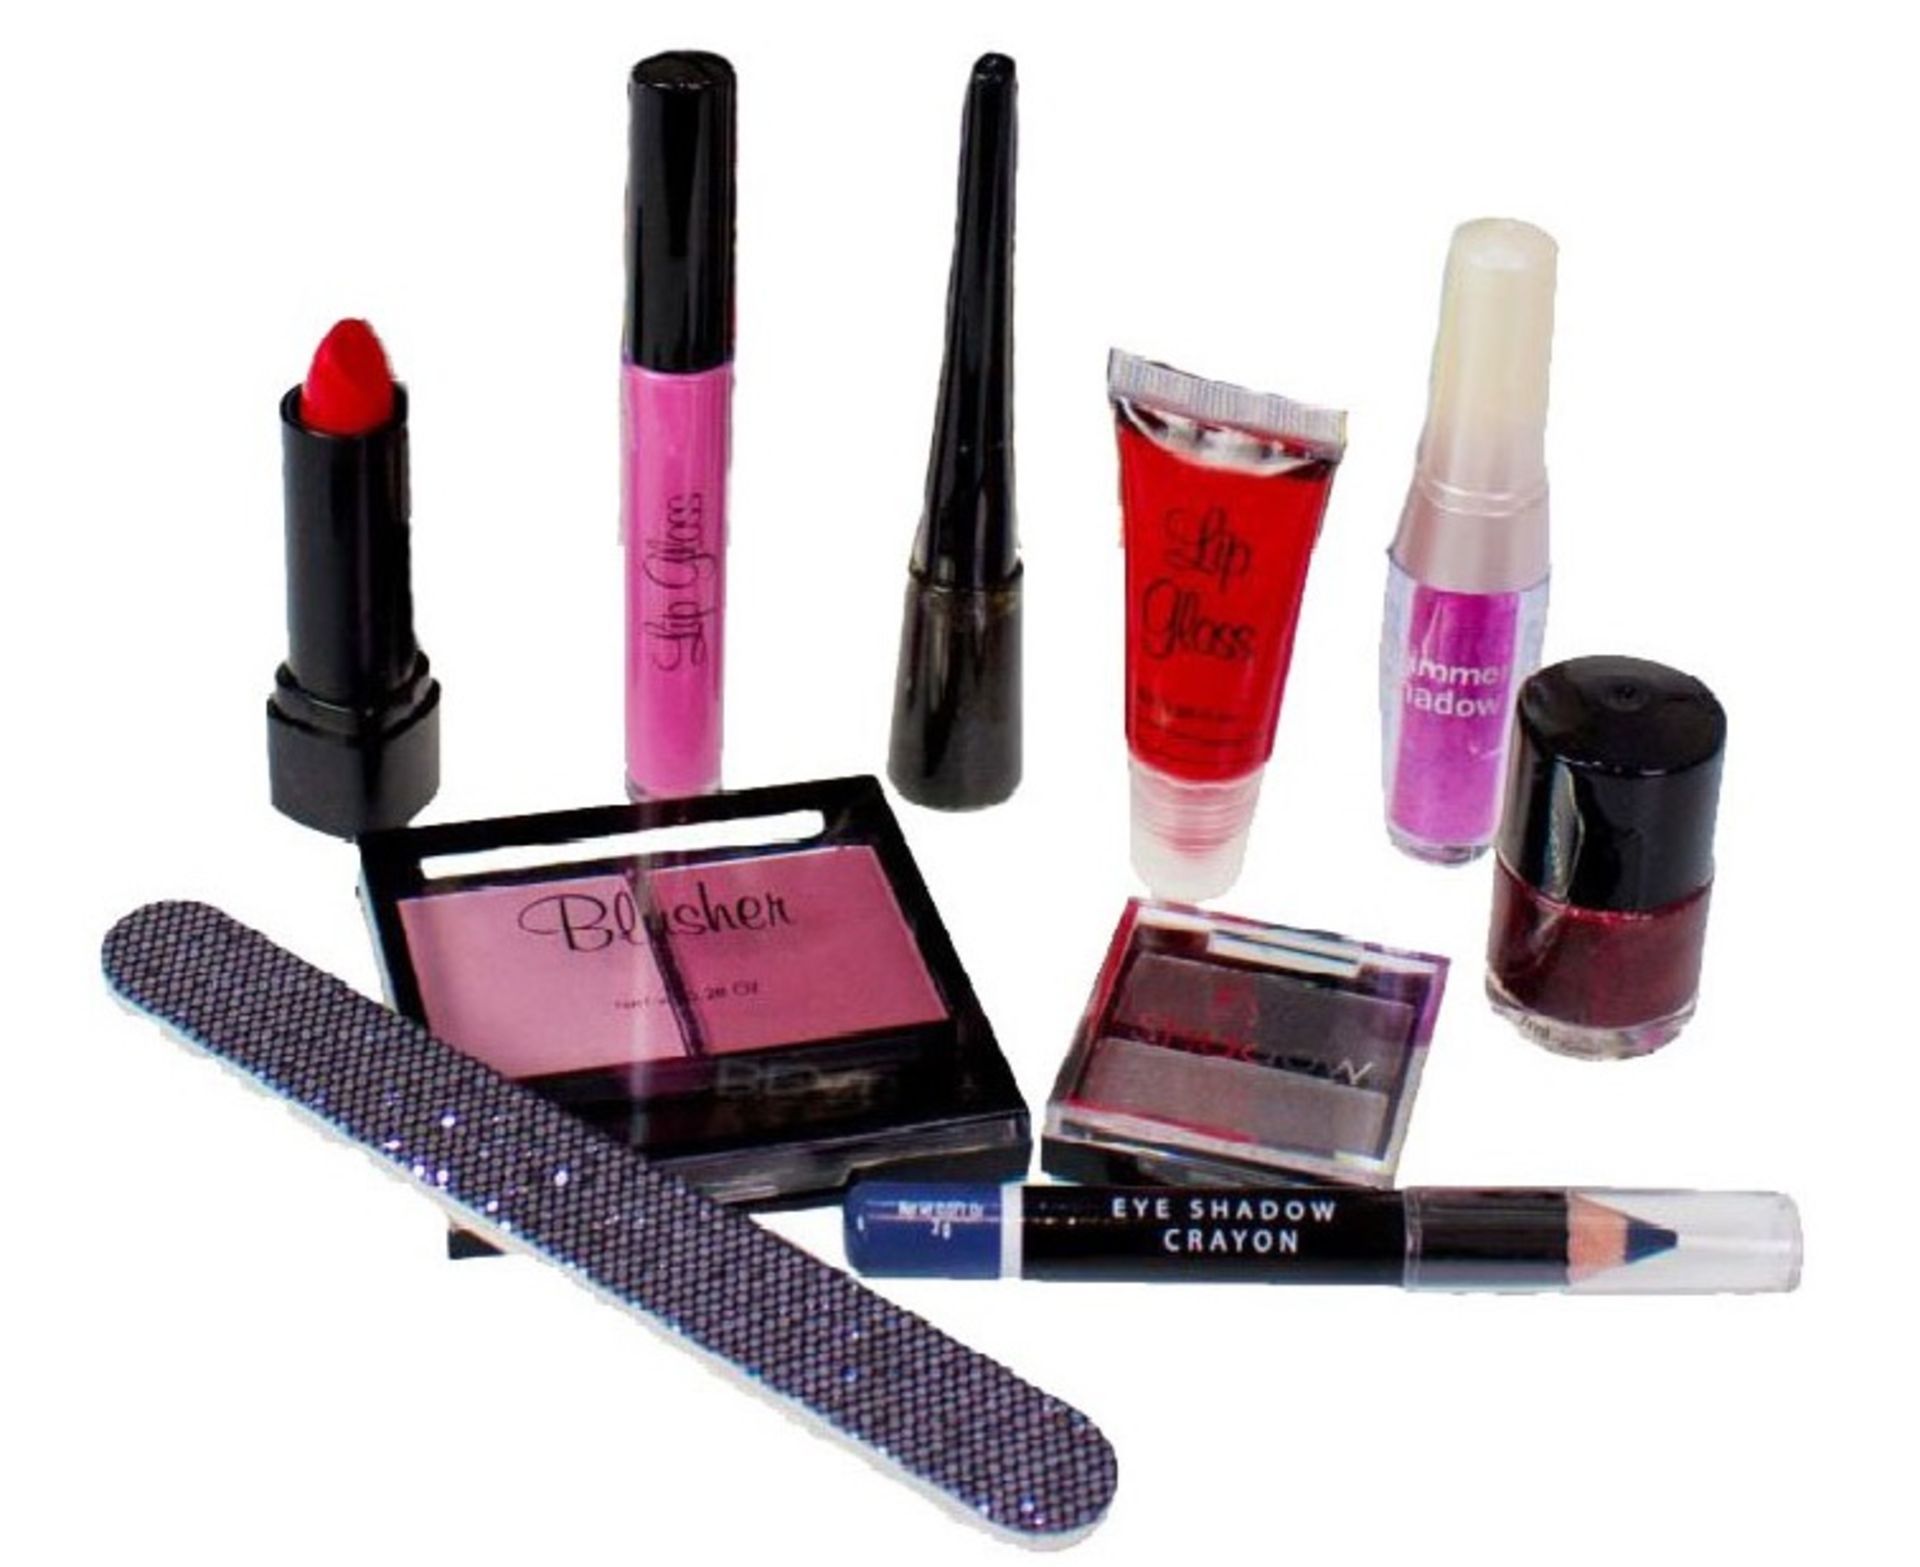 V *TRADE QTY* Brand New Ten Beauty Product Selection in Gift Bag (Contents vary) X200 YOUR BID PRICE